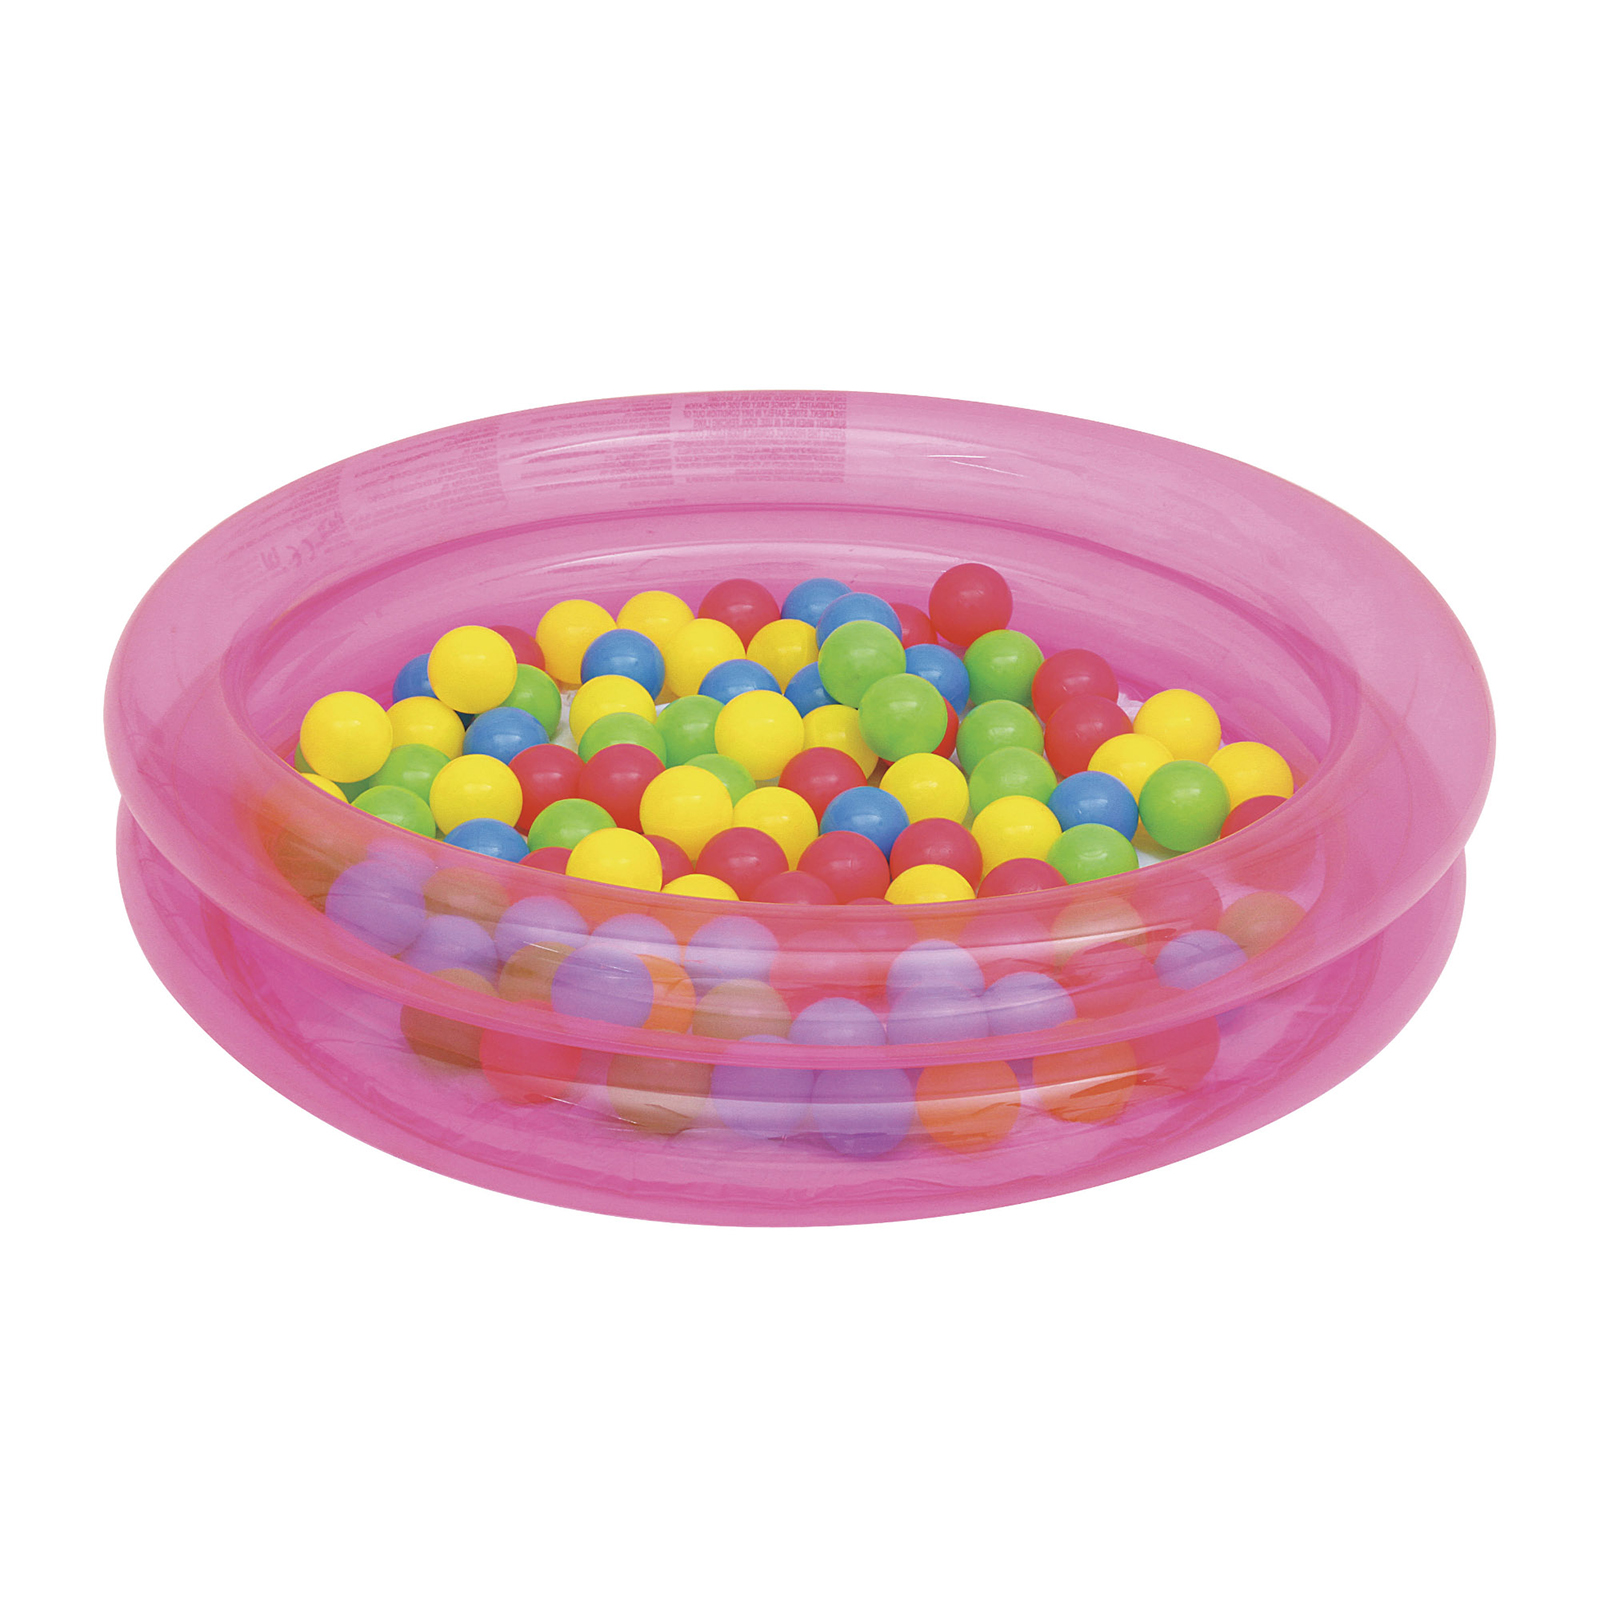 UPC 821808100576 product image for Bestway Up In and Over 2-Ring Pink Ball Pit Play Pool | upcitemdb.com